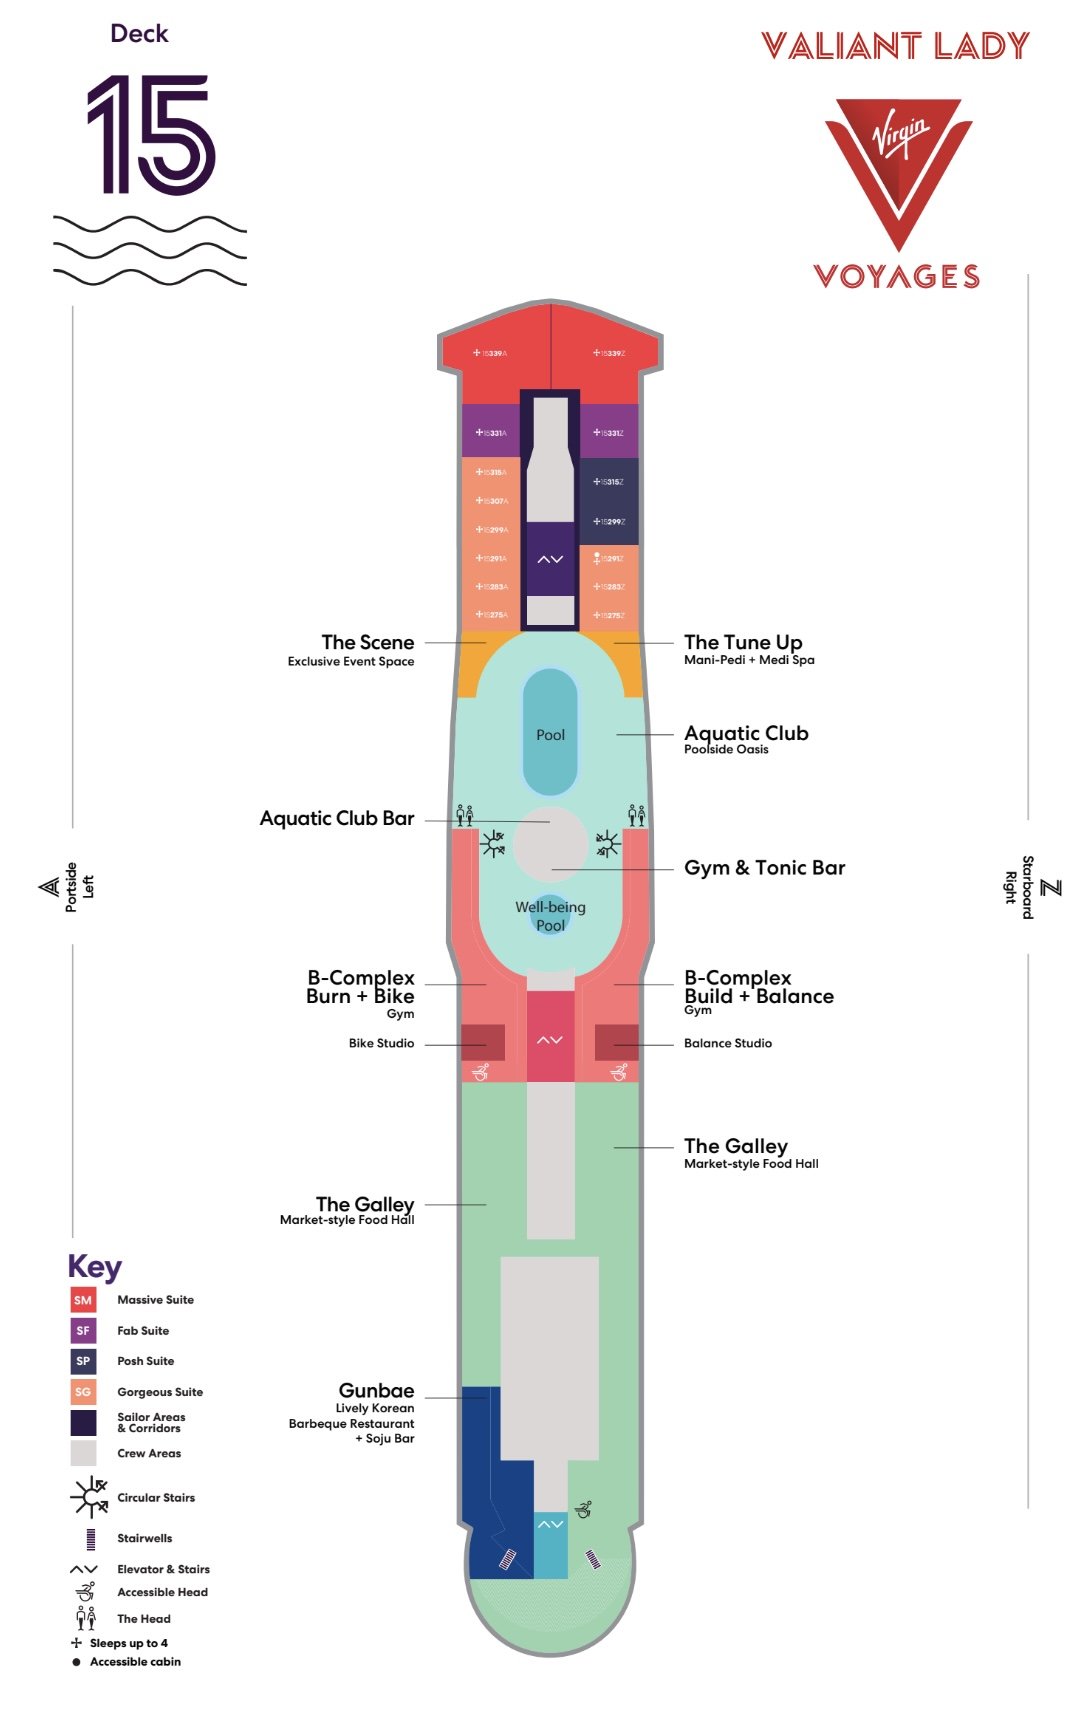 the voyage layout